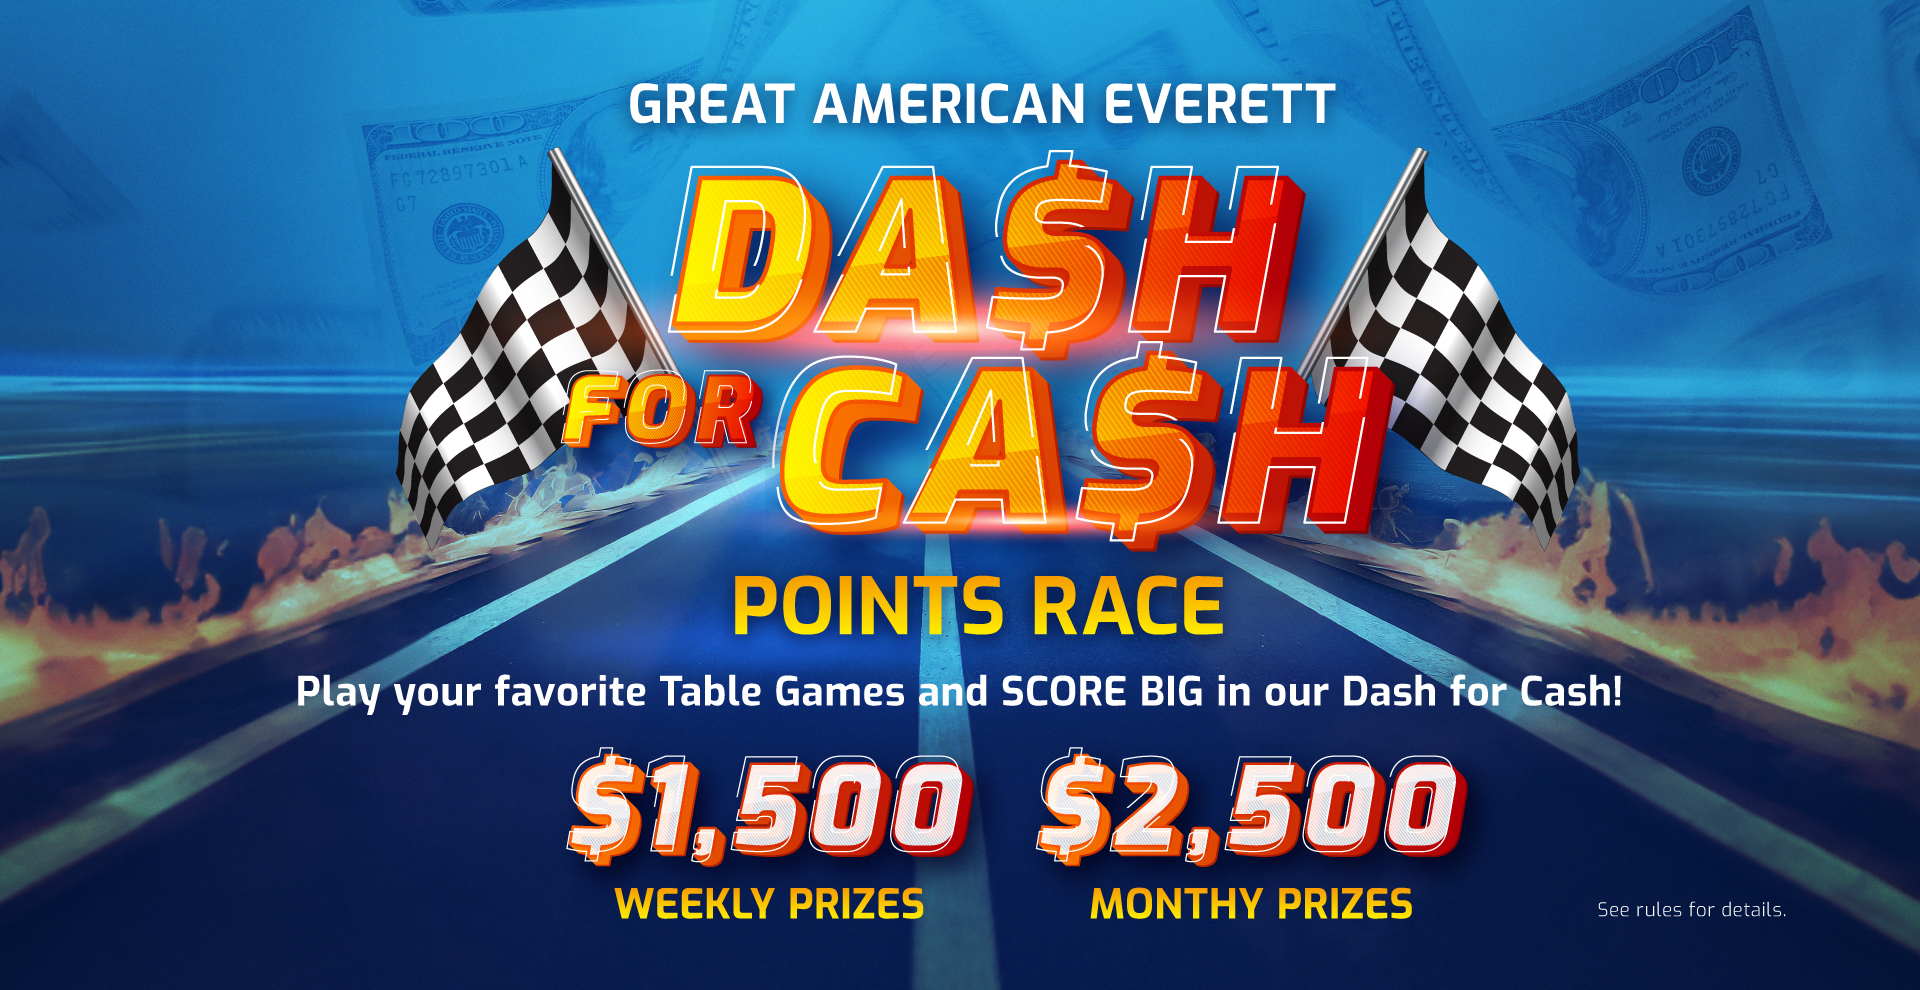 Great American Casino Everett | Dash for Cash Points Race